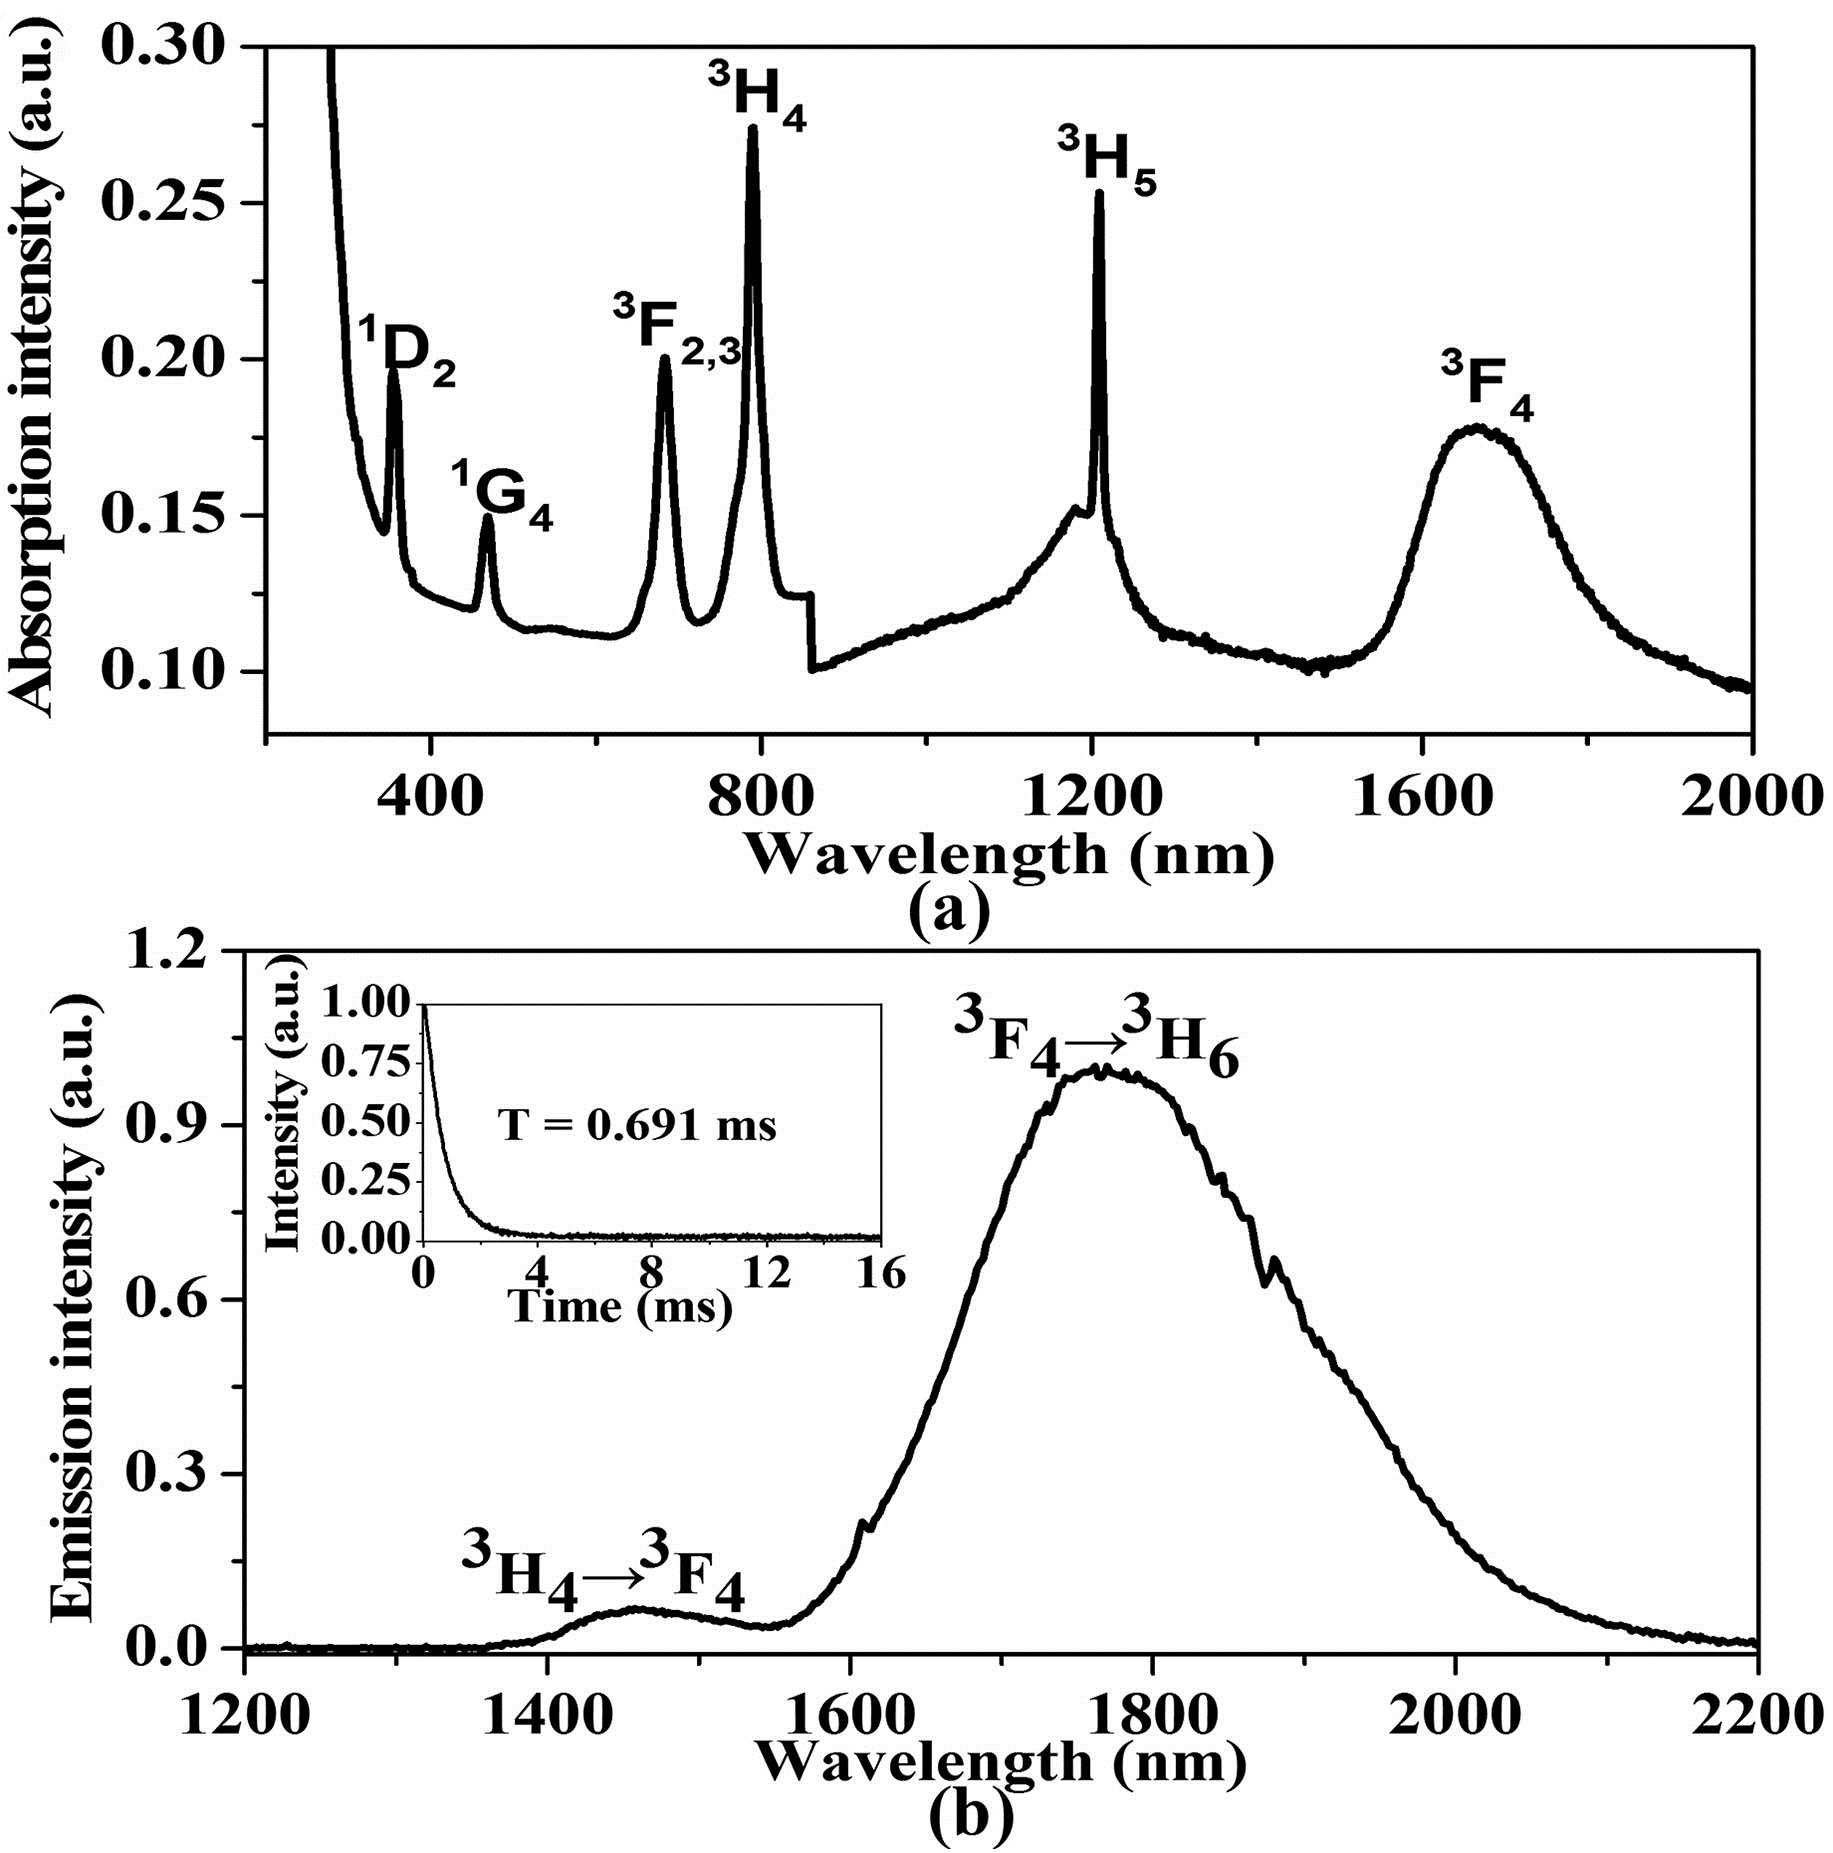 Spectroscopic characteristics of LC SGTS fiber. (a) The absorption spectrum. (b) The fluorescence spectrum and fluorescence decay curve (inset) of the F43→H63 transition.